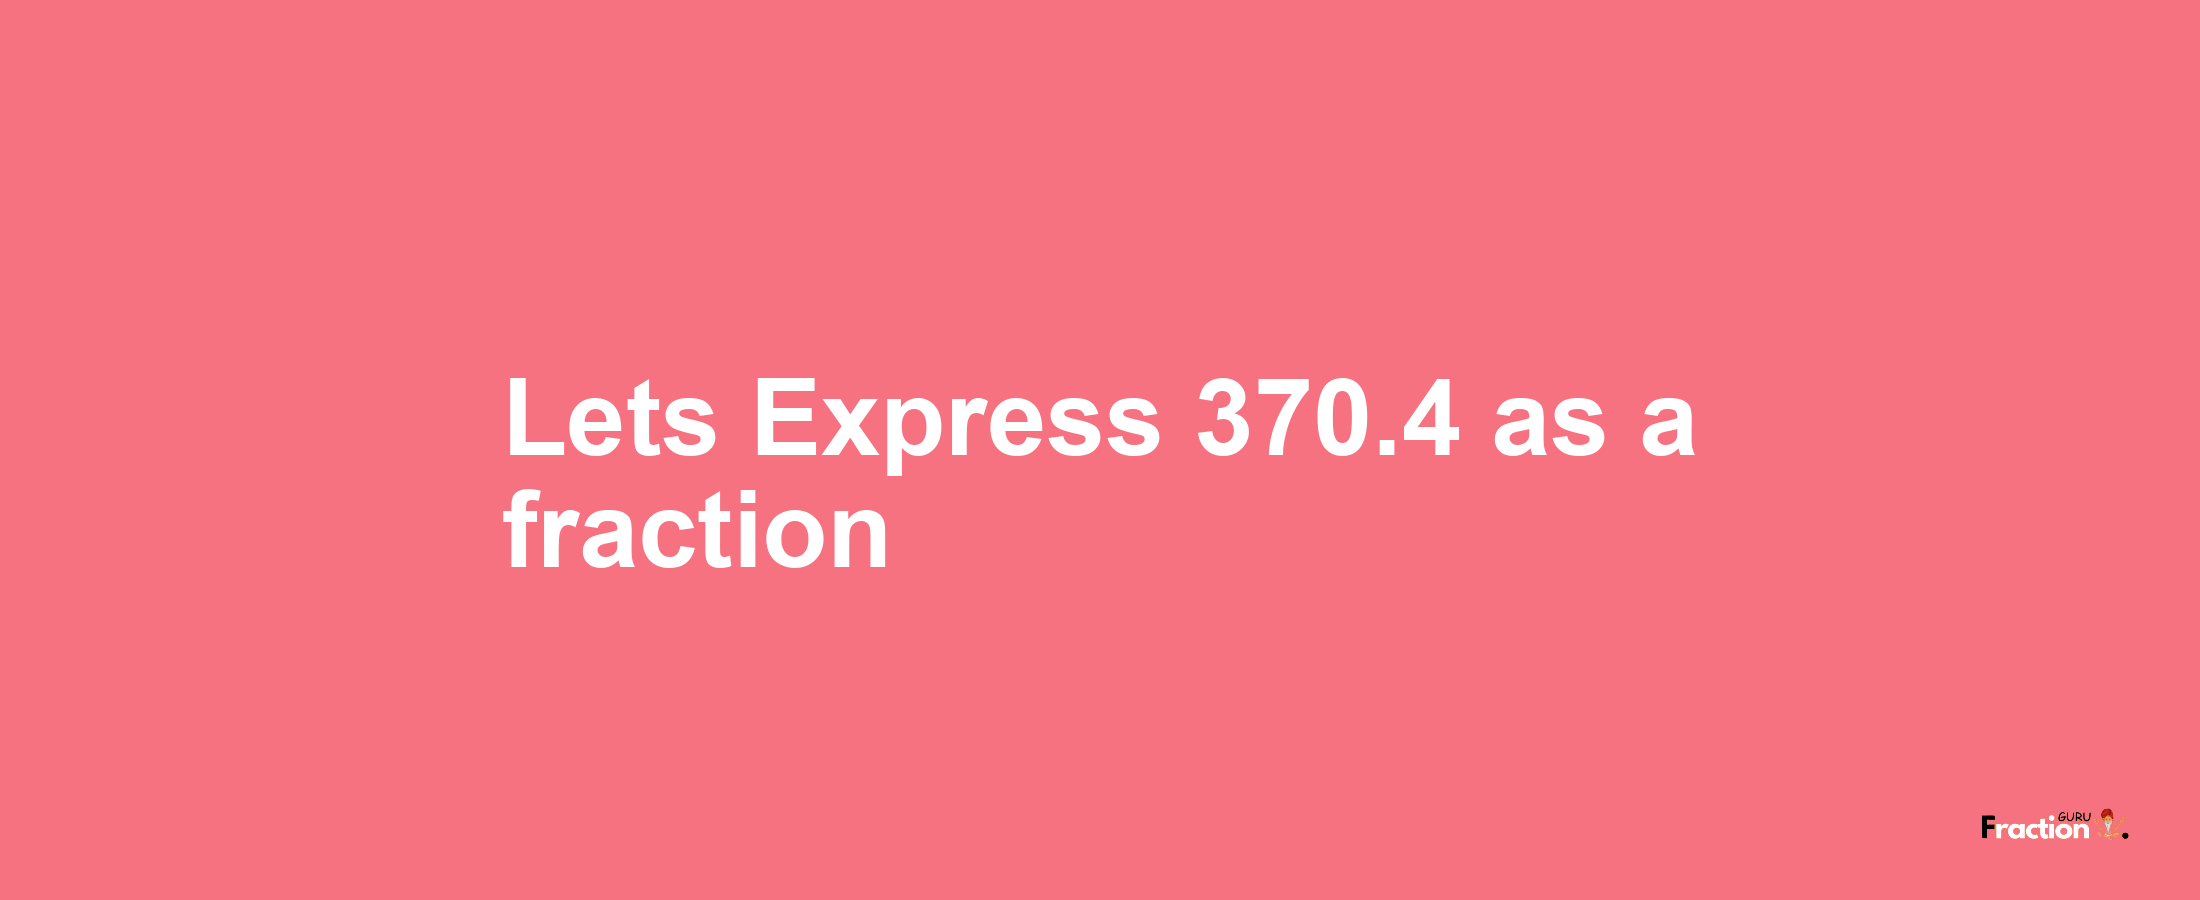 Lets Express 370.4 as afraction